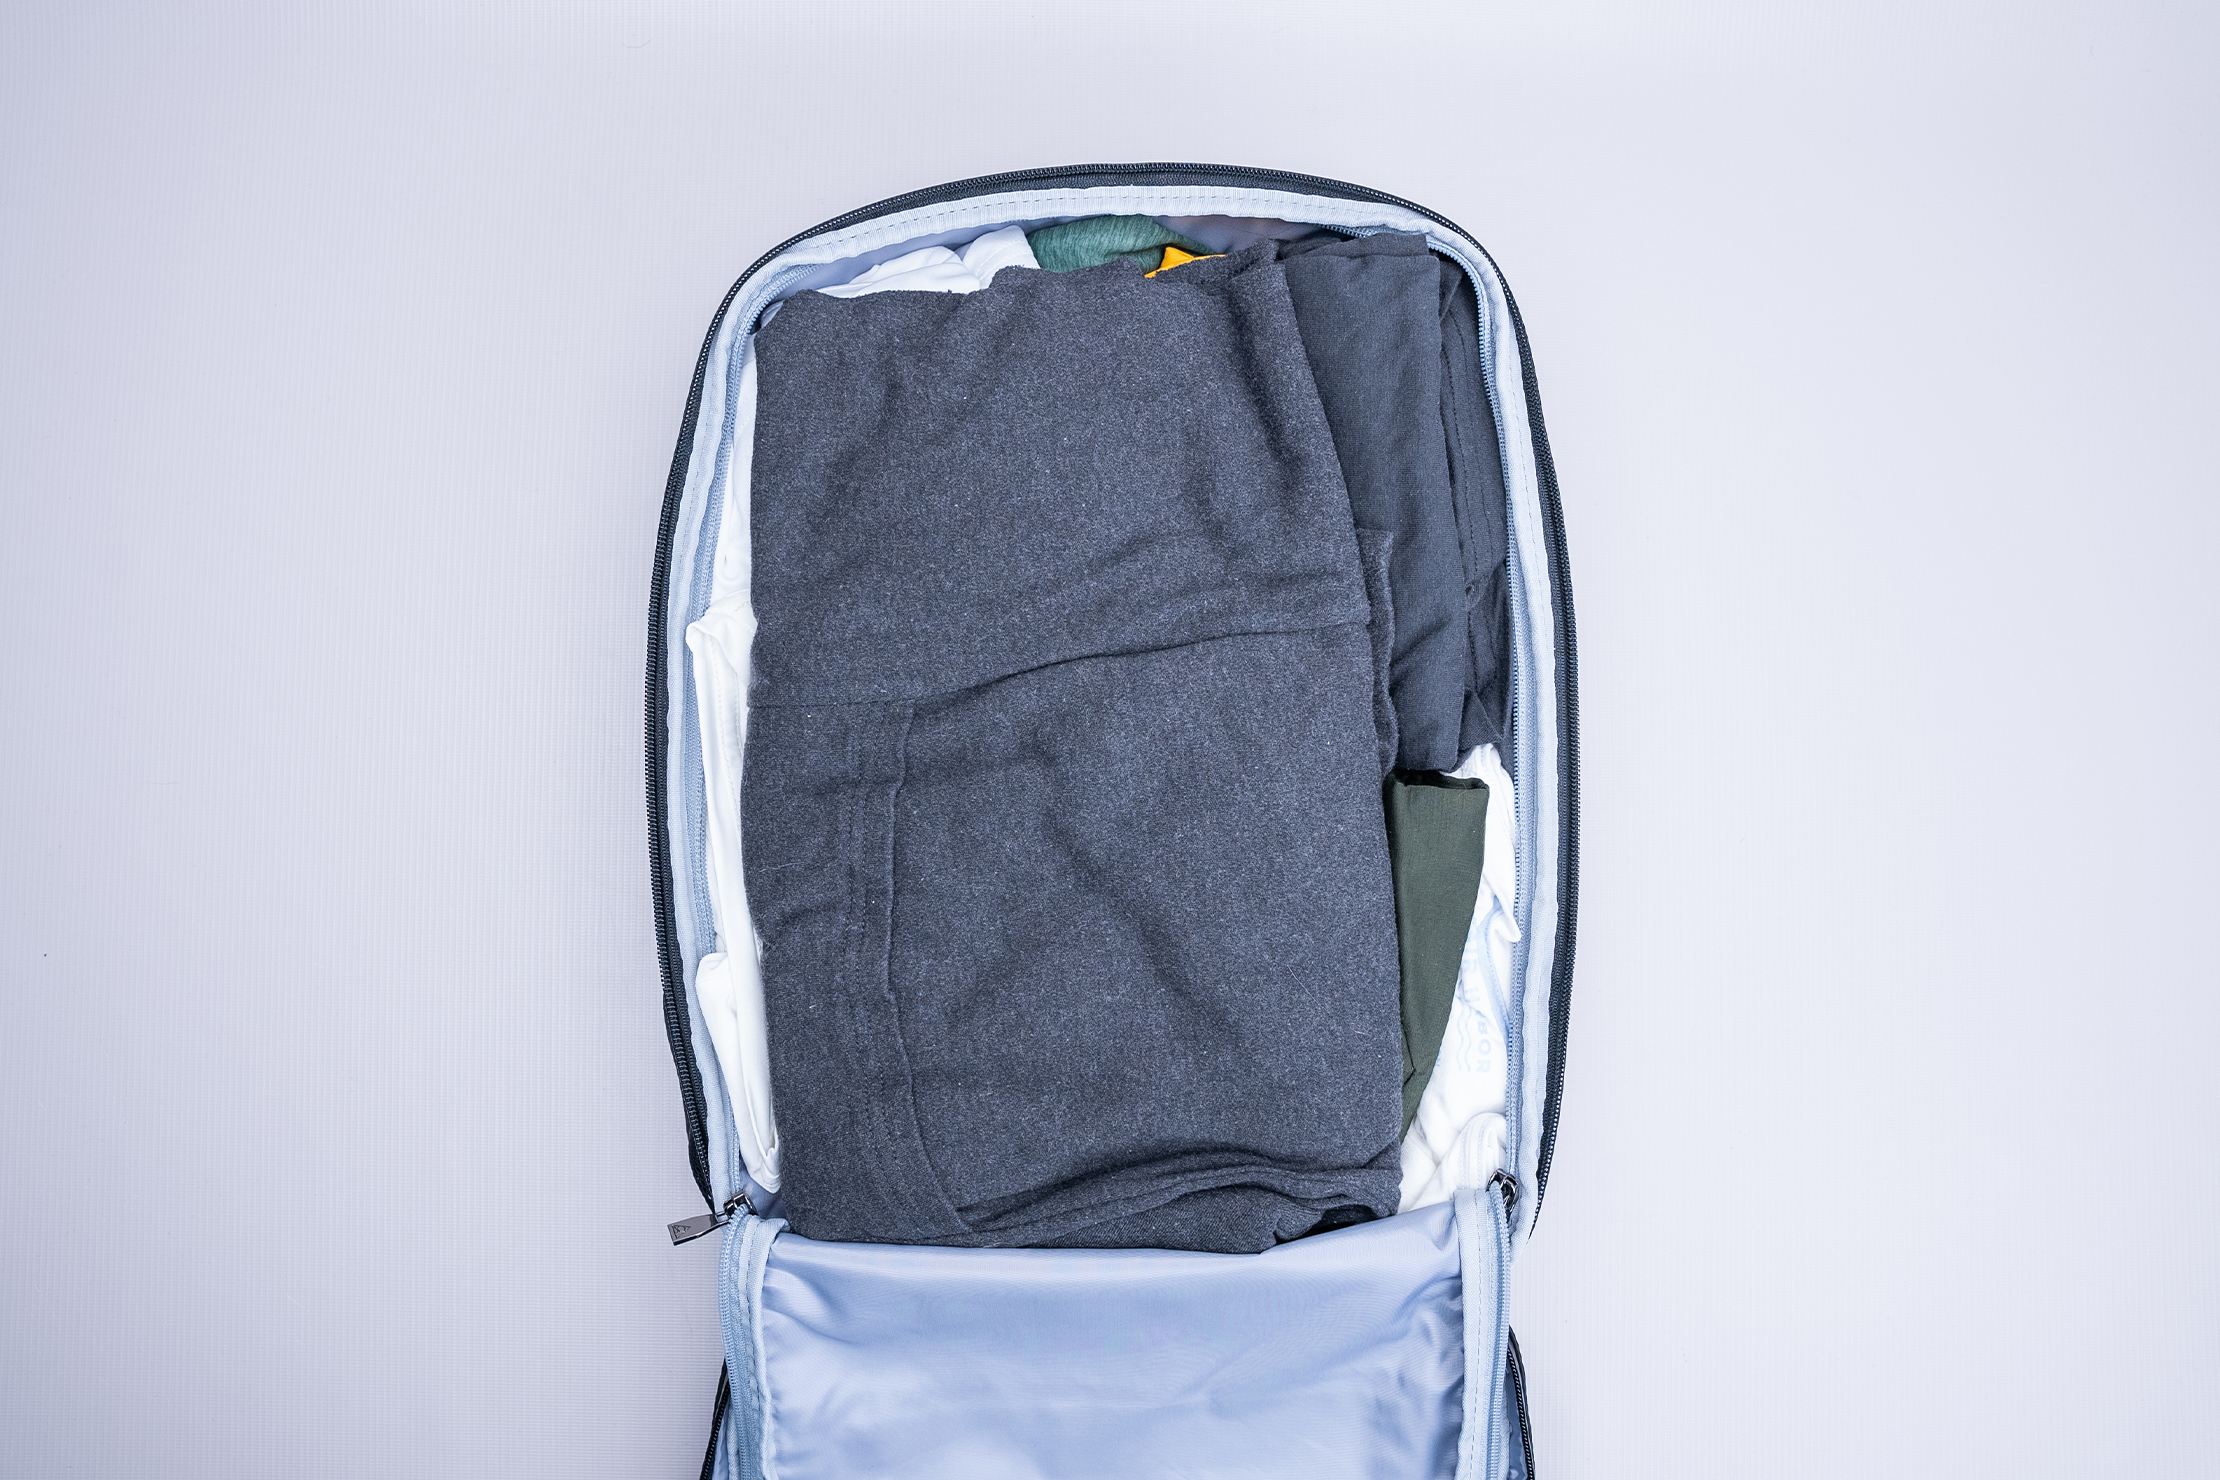 Arden Cove MB Packing Backpack Main